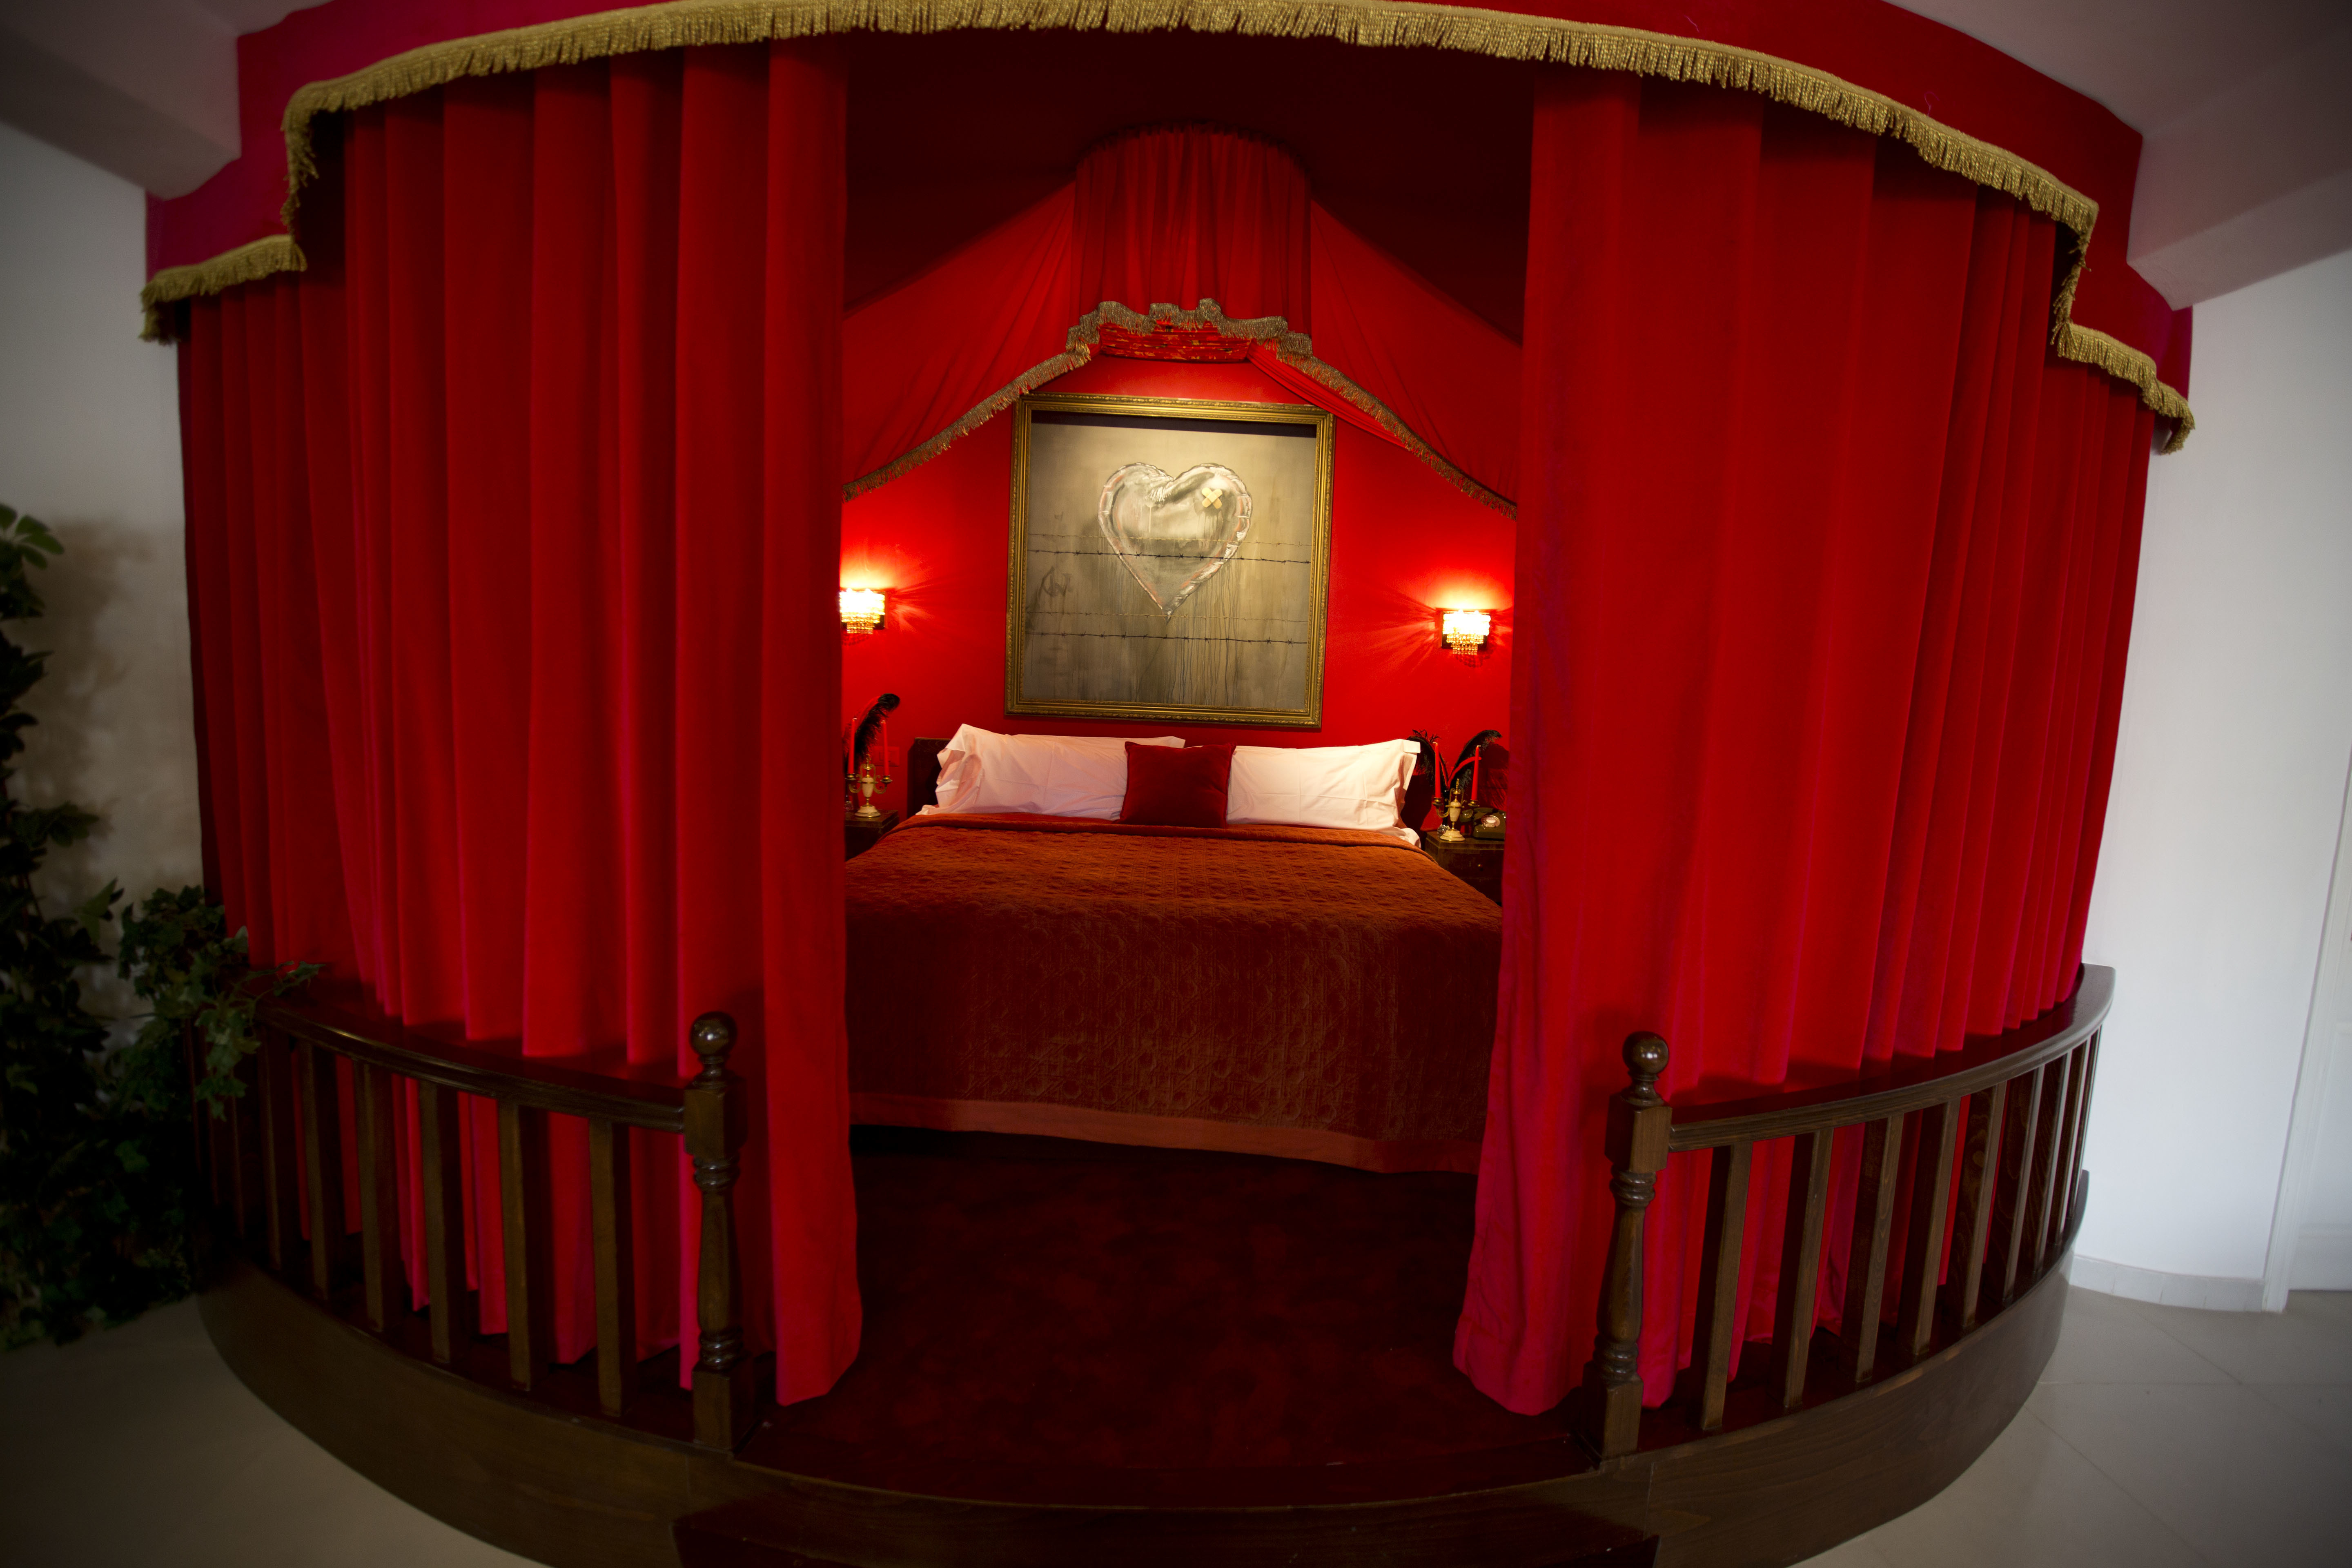 The presidential suite of the The Walled Off Hotel